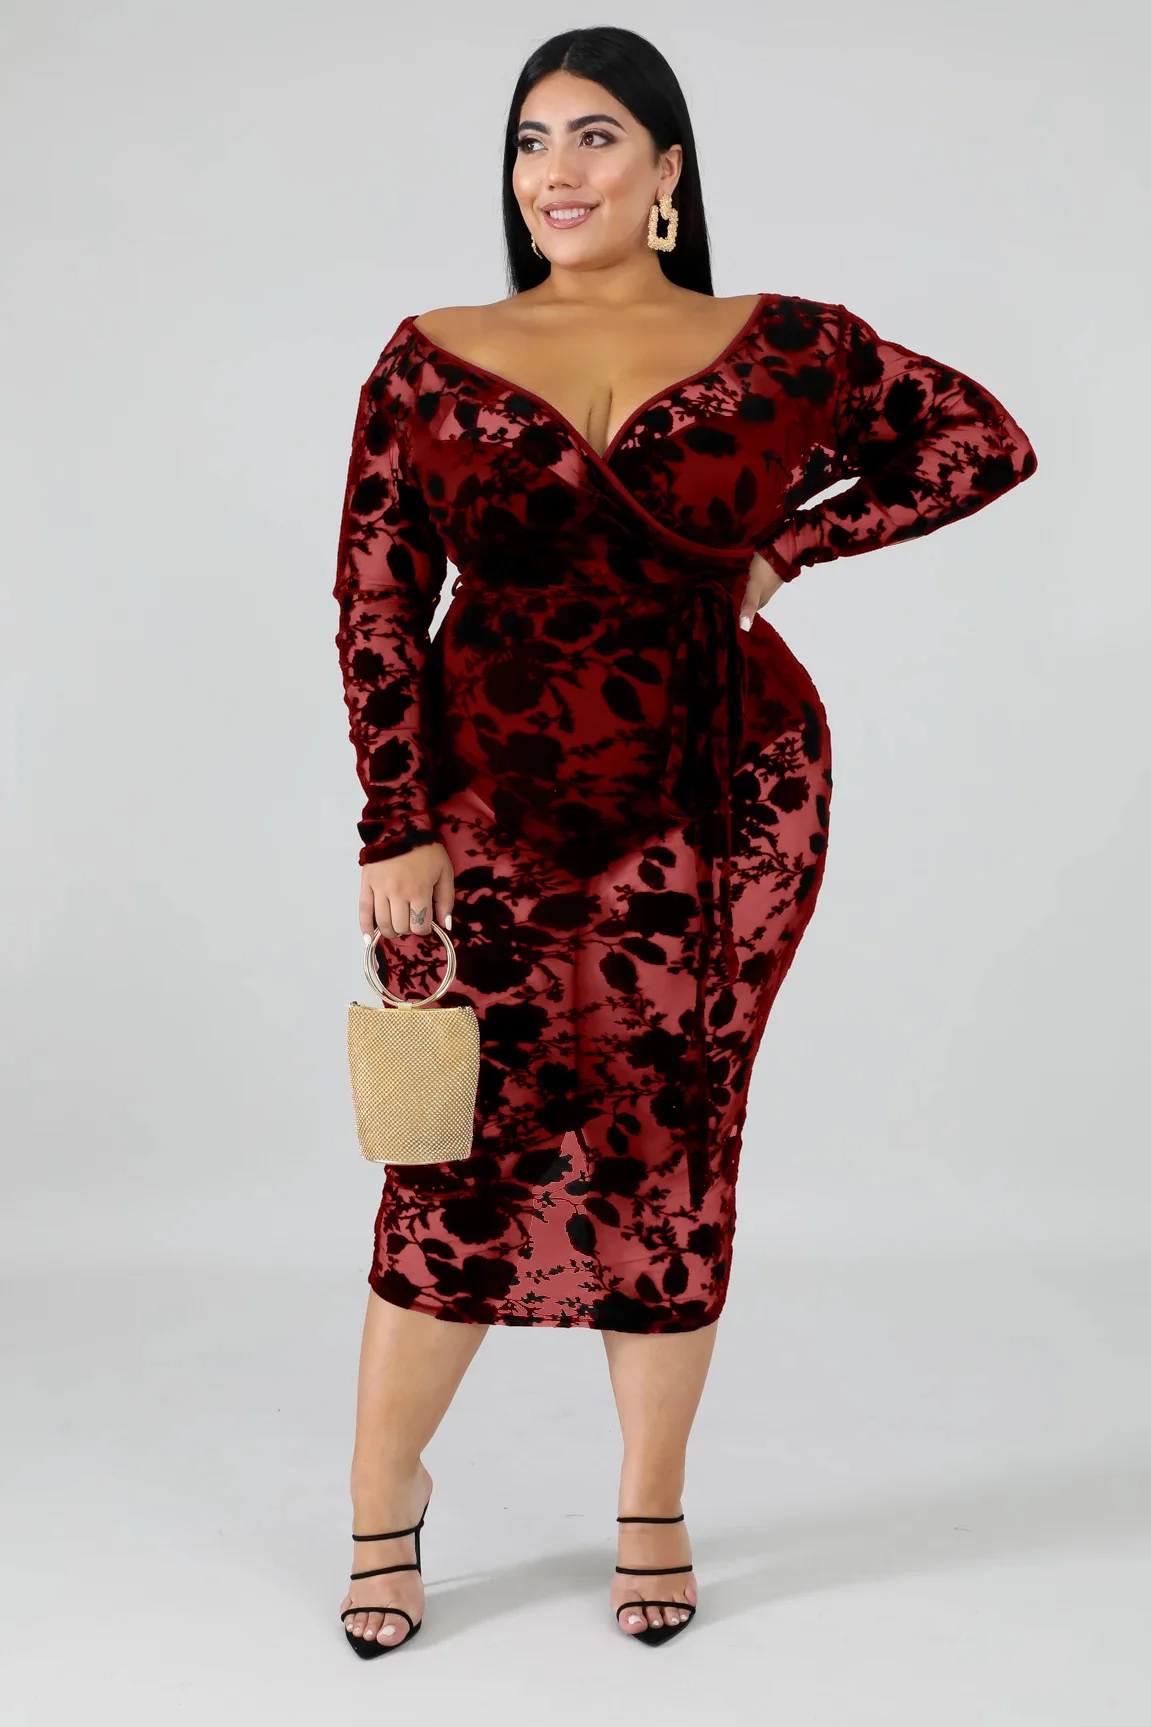 Bh277 Women Plus Size Sexy Lace Long Sleeve Evening Dress - Buy Lace ...